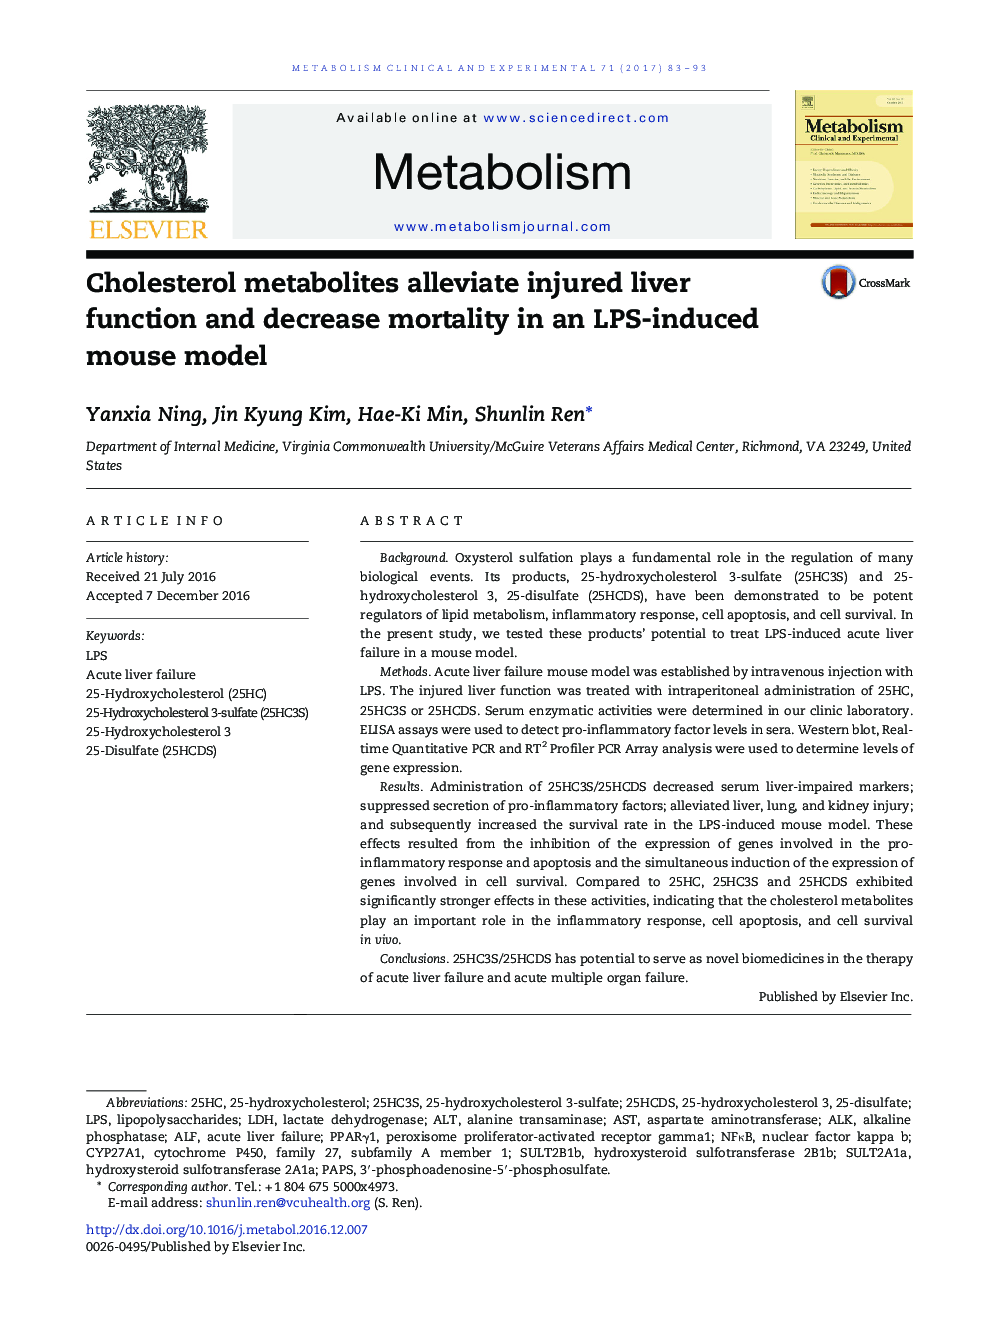 Cholesterol metabolites alleviate injured liver function and decrease mortality in an LPS-induced mouse model